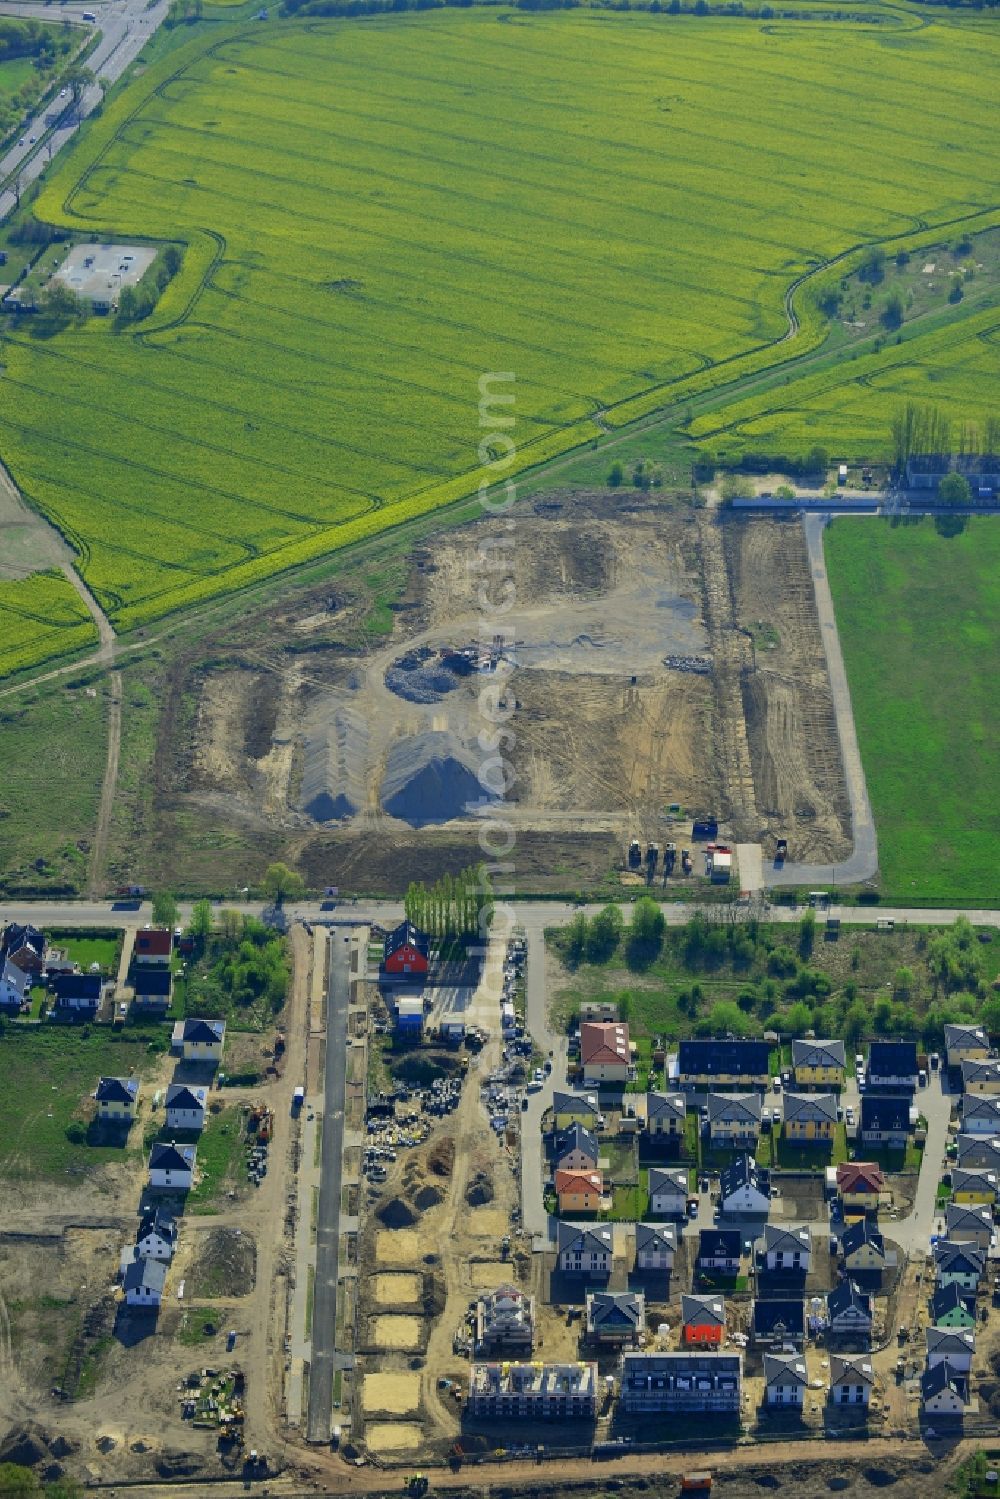 Aerial image Berlin - Construction site on Pilgramer Strasse in the Mahlsdorf part of the district of Marzahn-Hellersdorf in Berlin in Germany. The site is located opposite single family homes and is surrounded by fields and meadows. It is supposed to become a furniture store